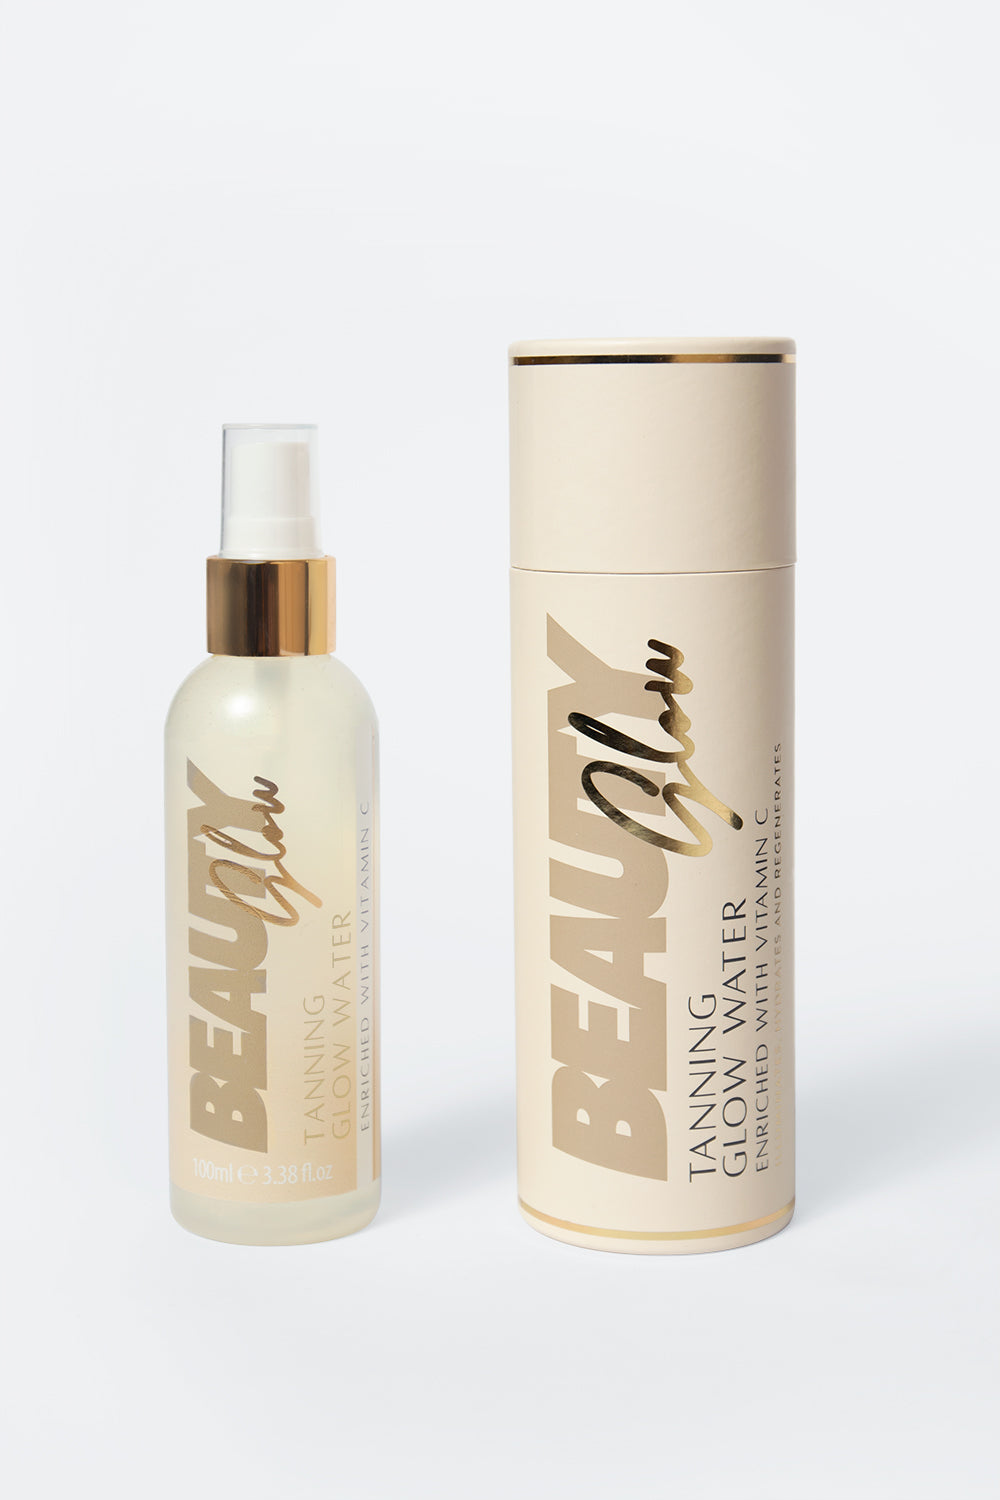 Beauty Glow Tanning Glow Water with Vitamin C